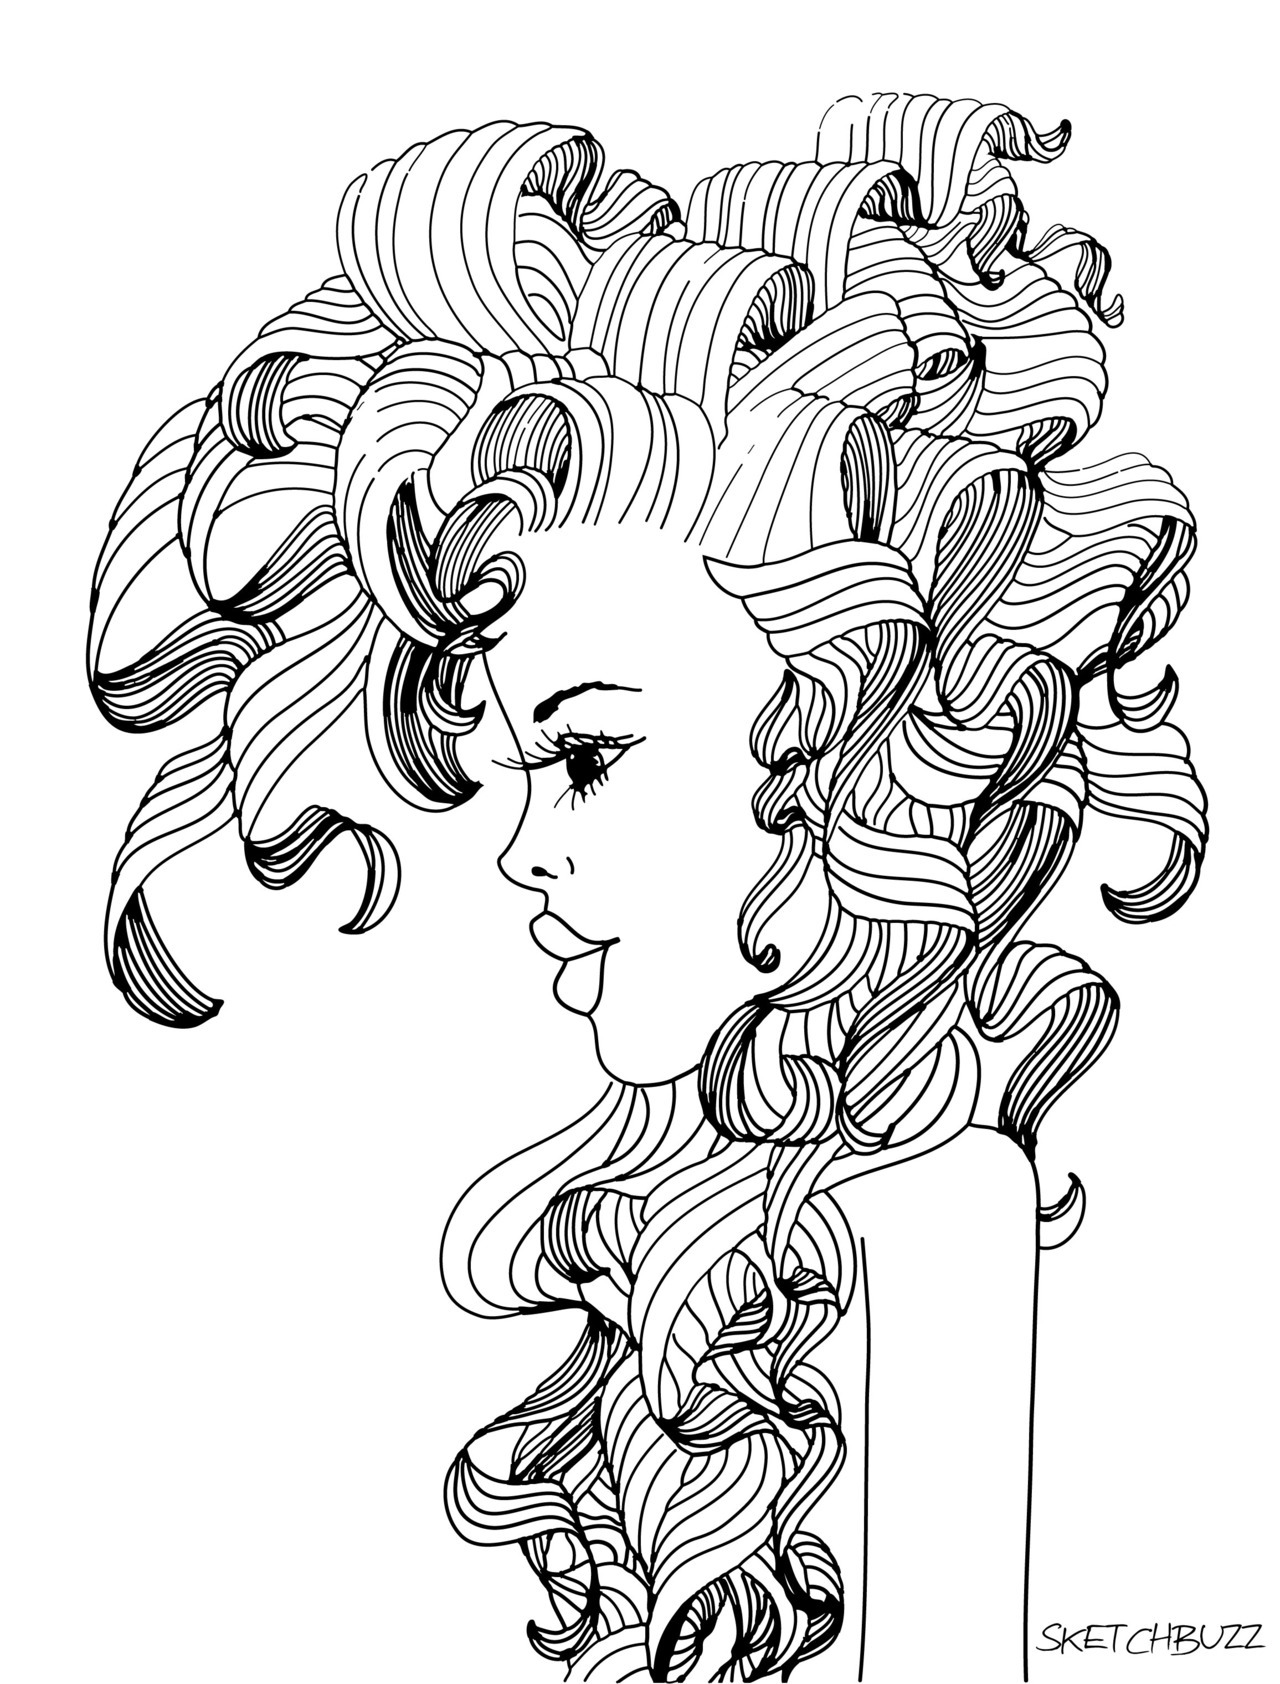 when it comes to hair… the bigger the better! i love to doodle. sketchbuzz